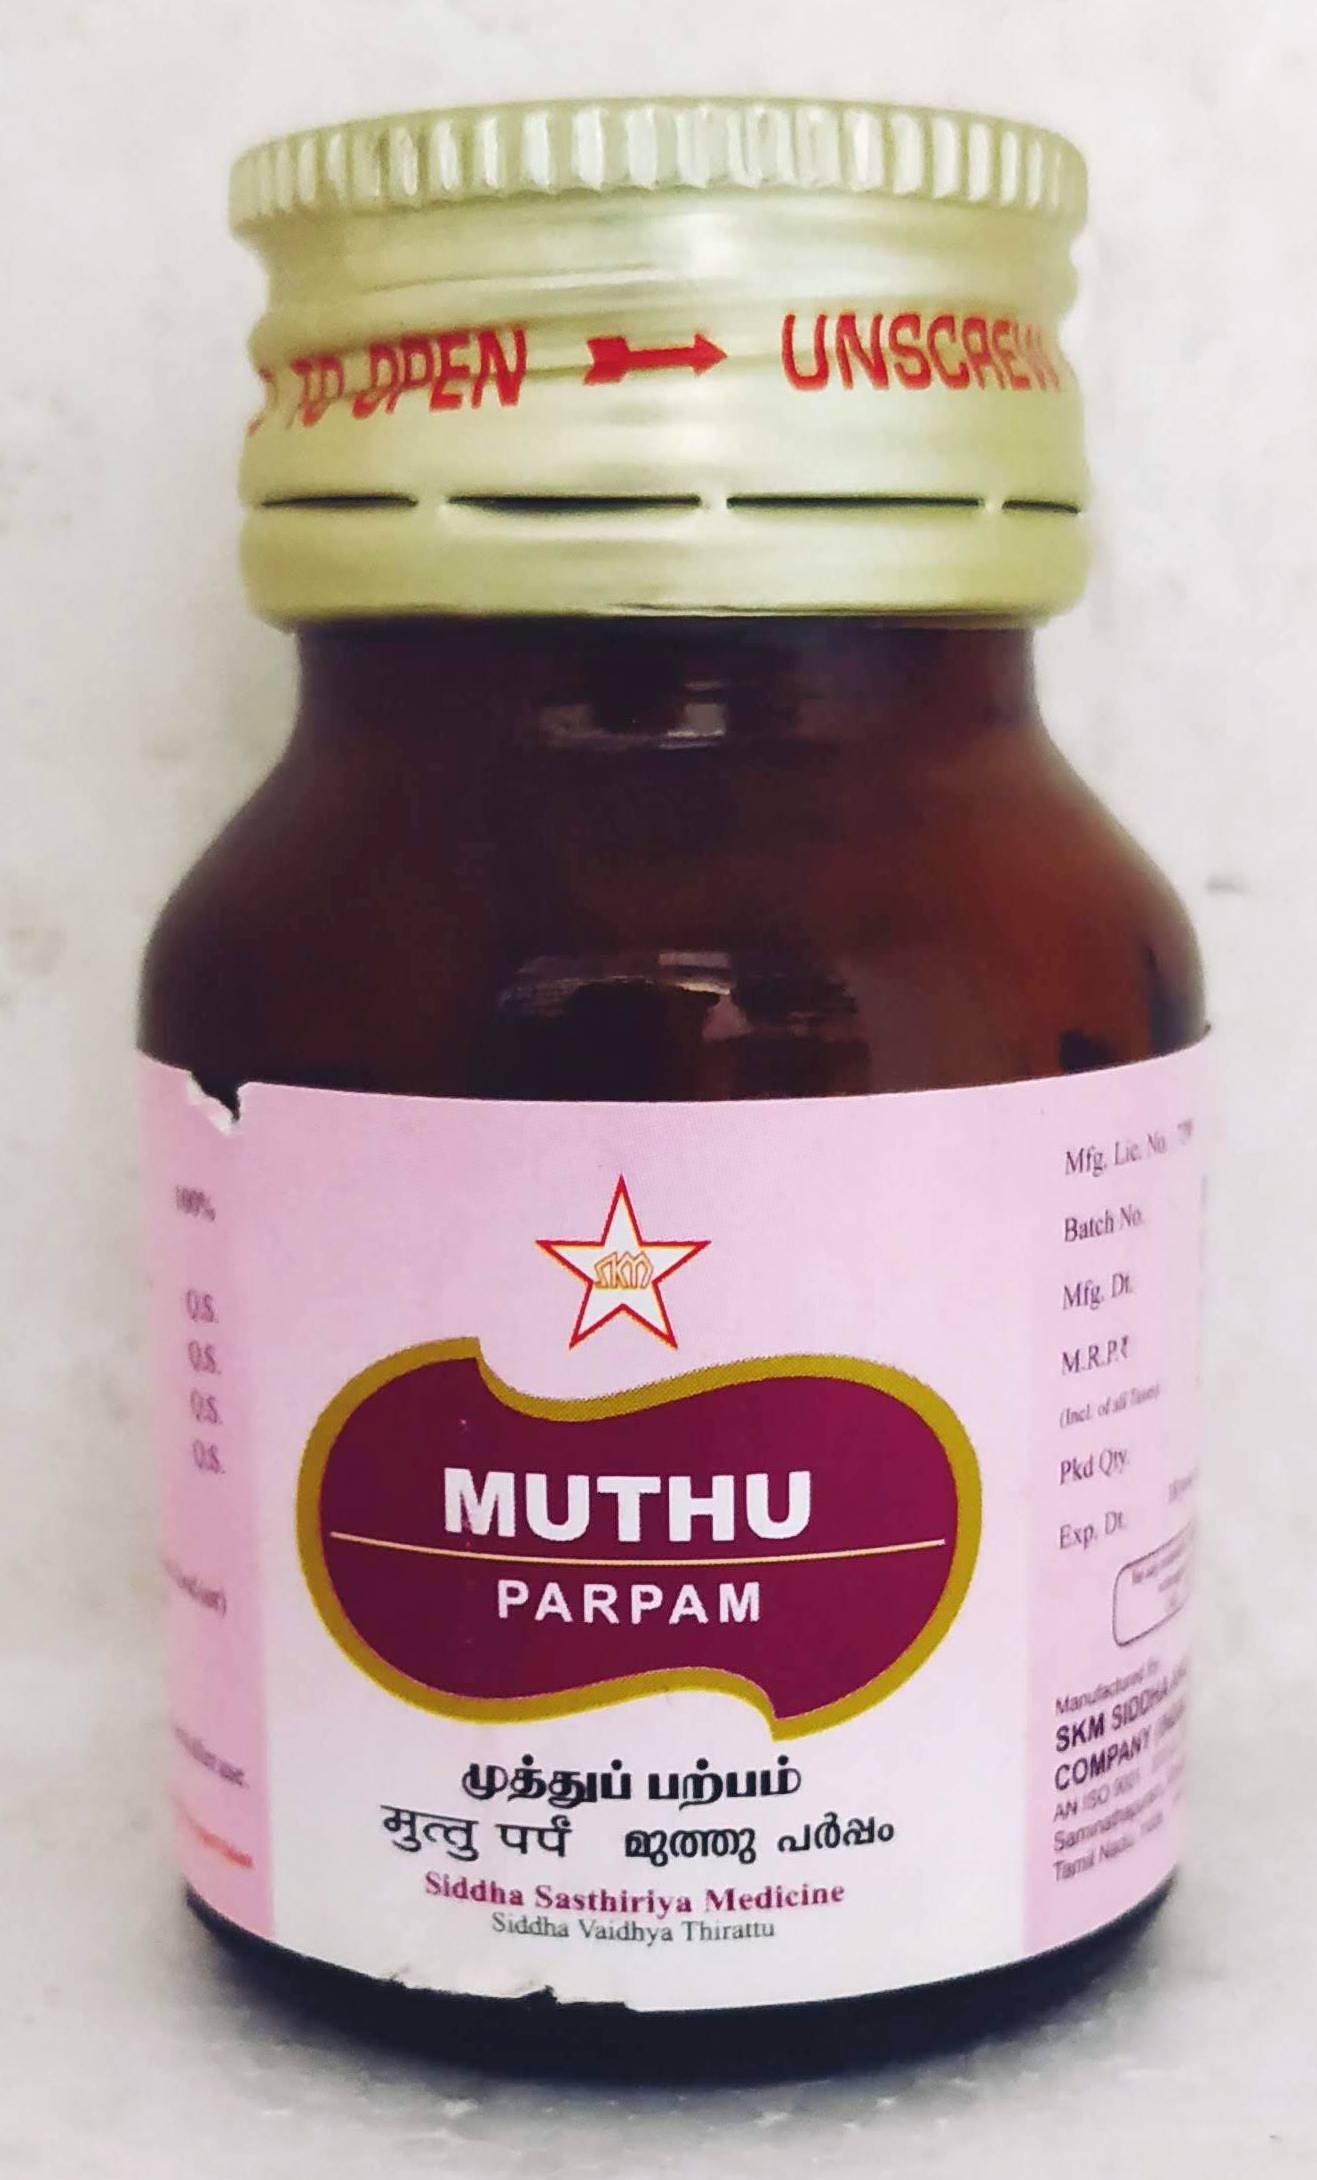 Shop Muthu Parpam 10gm at price 785.00 from SKM Online - Ayush Care